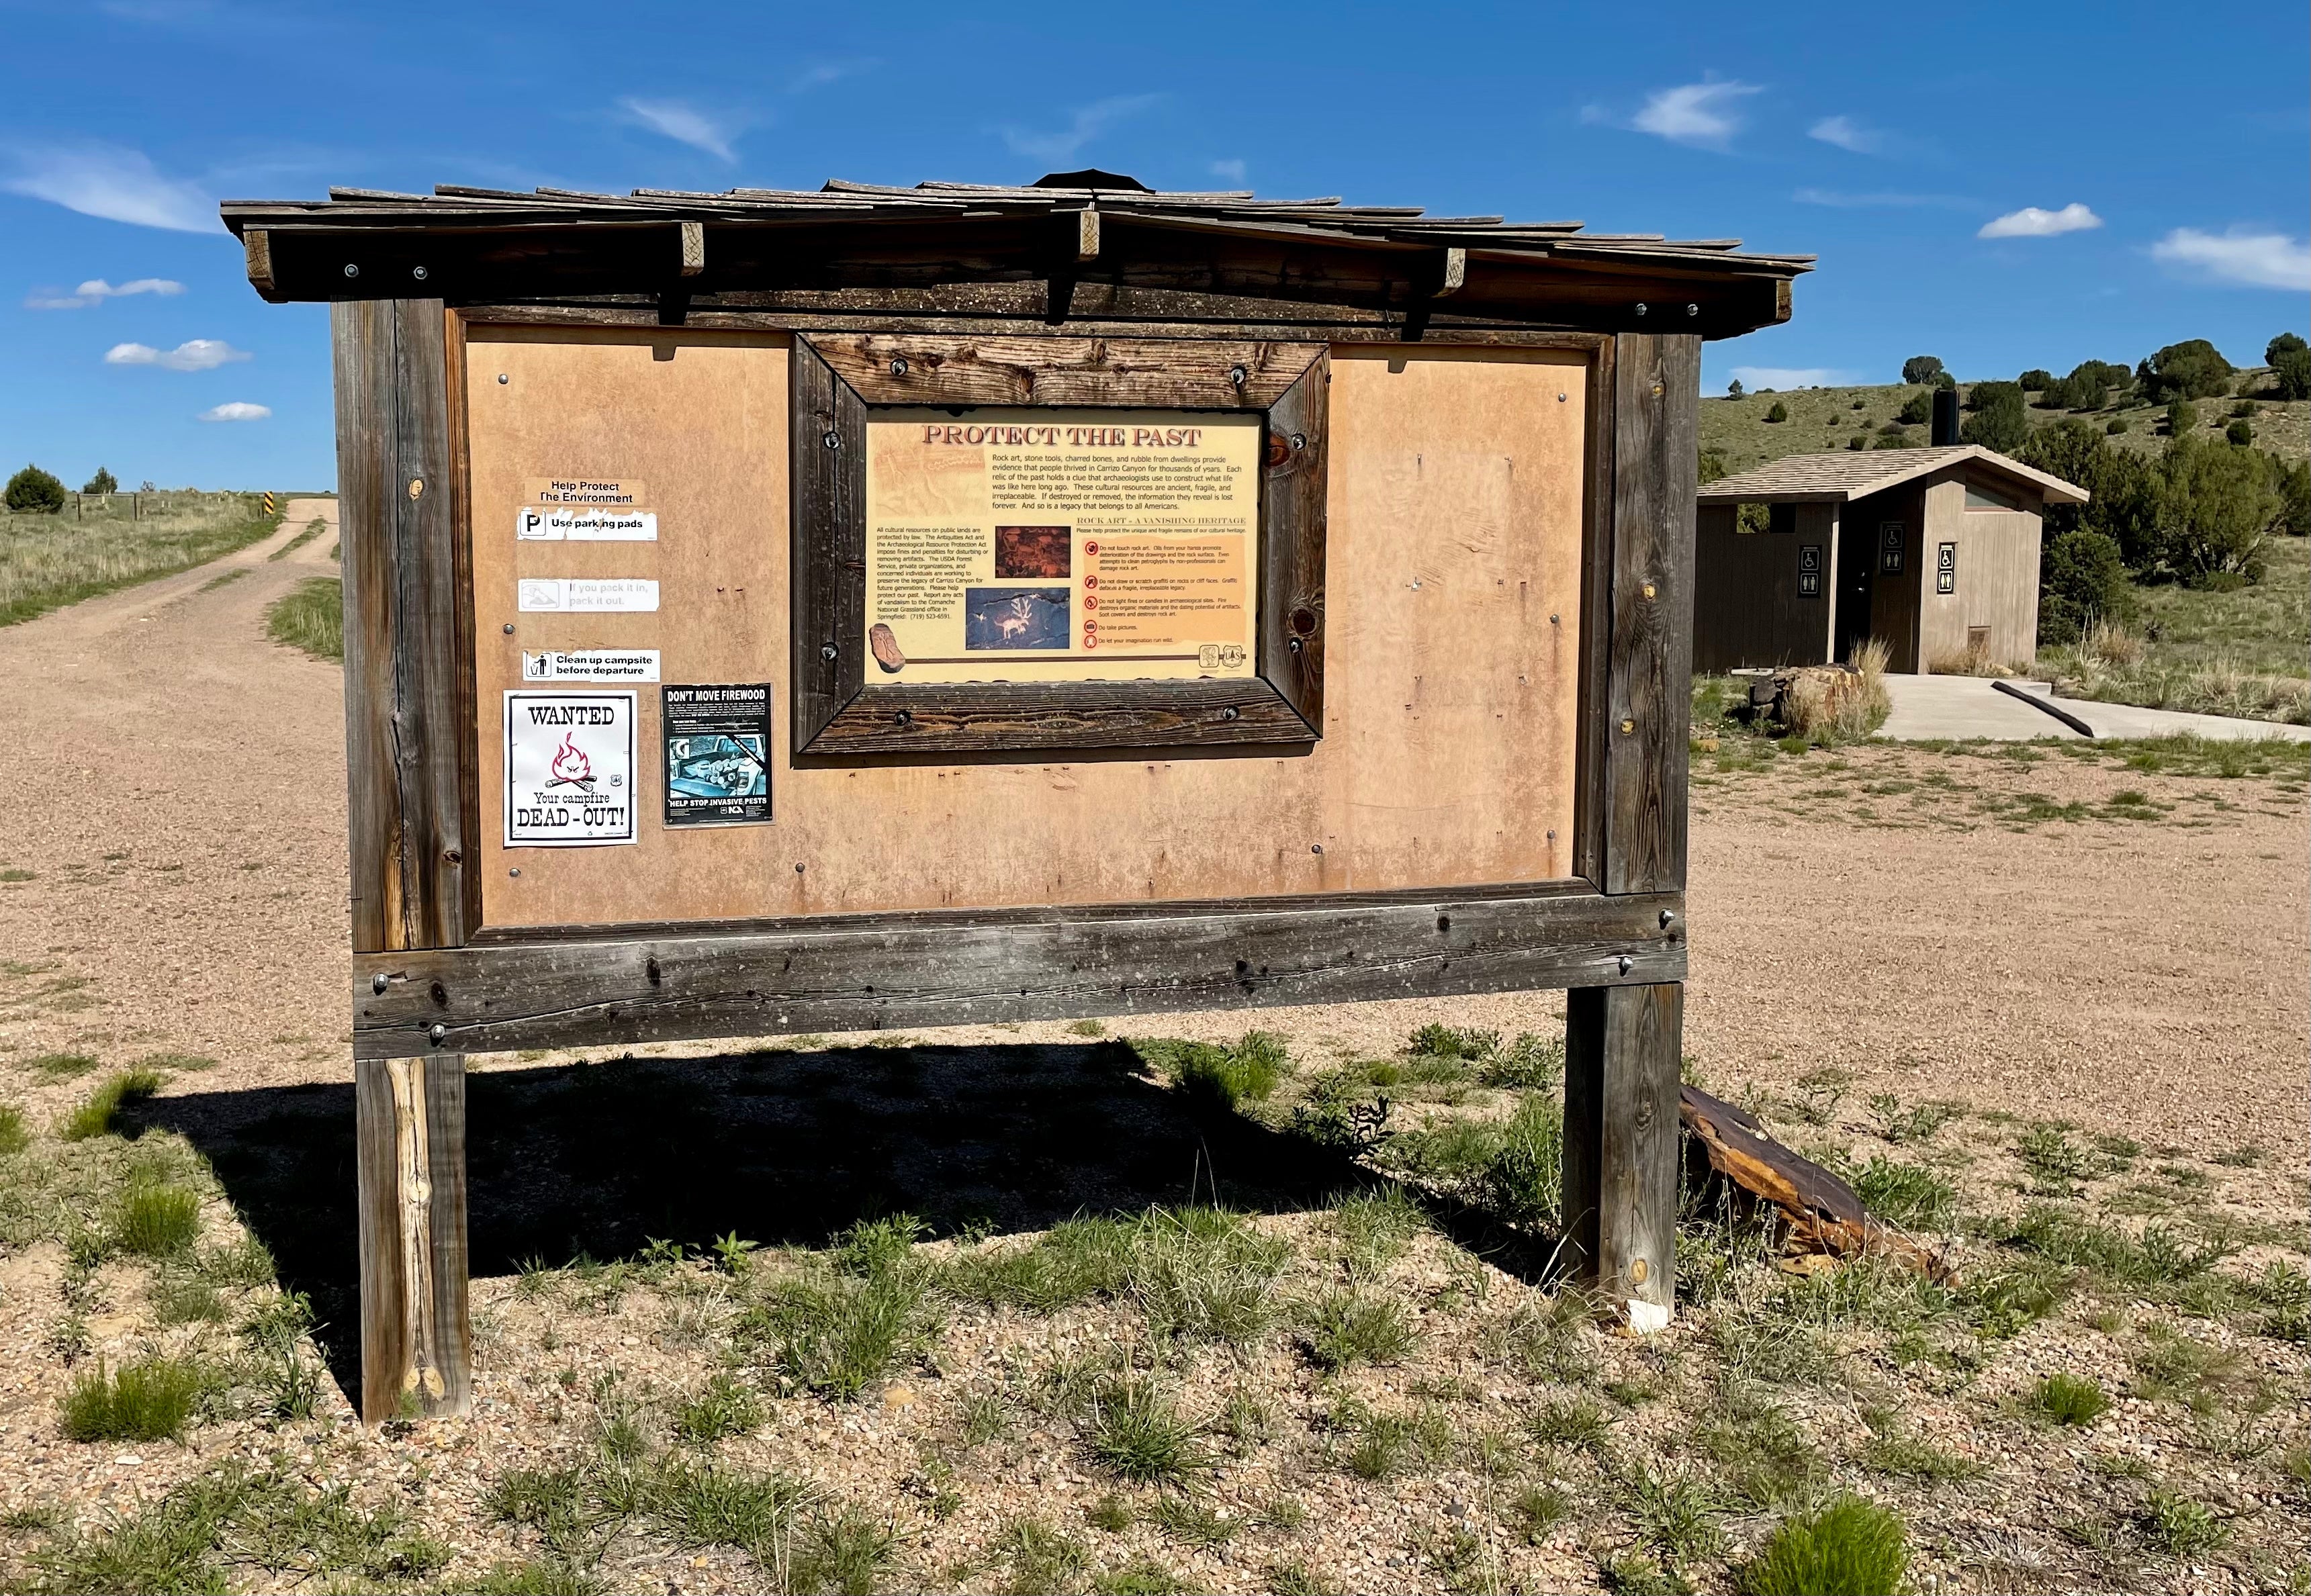 Camper submitted image from Carizzo Canyon Picnic Area, Comanche National Grassland - 4